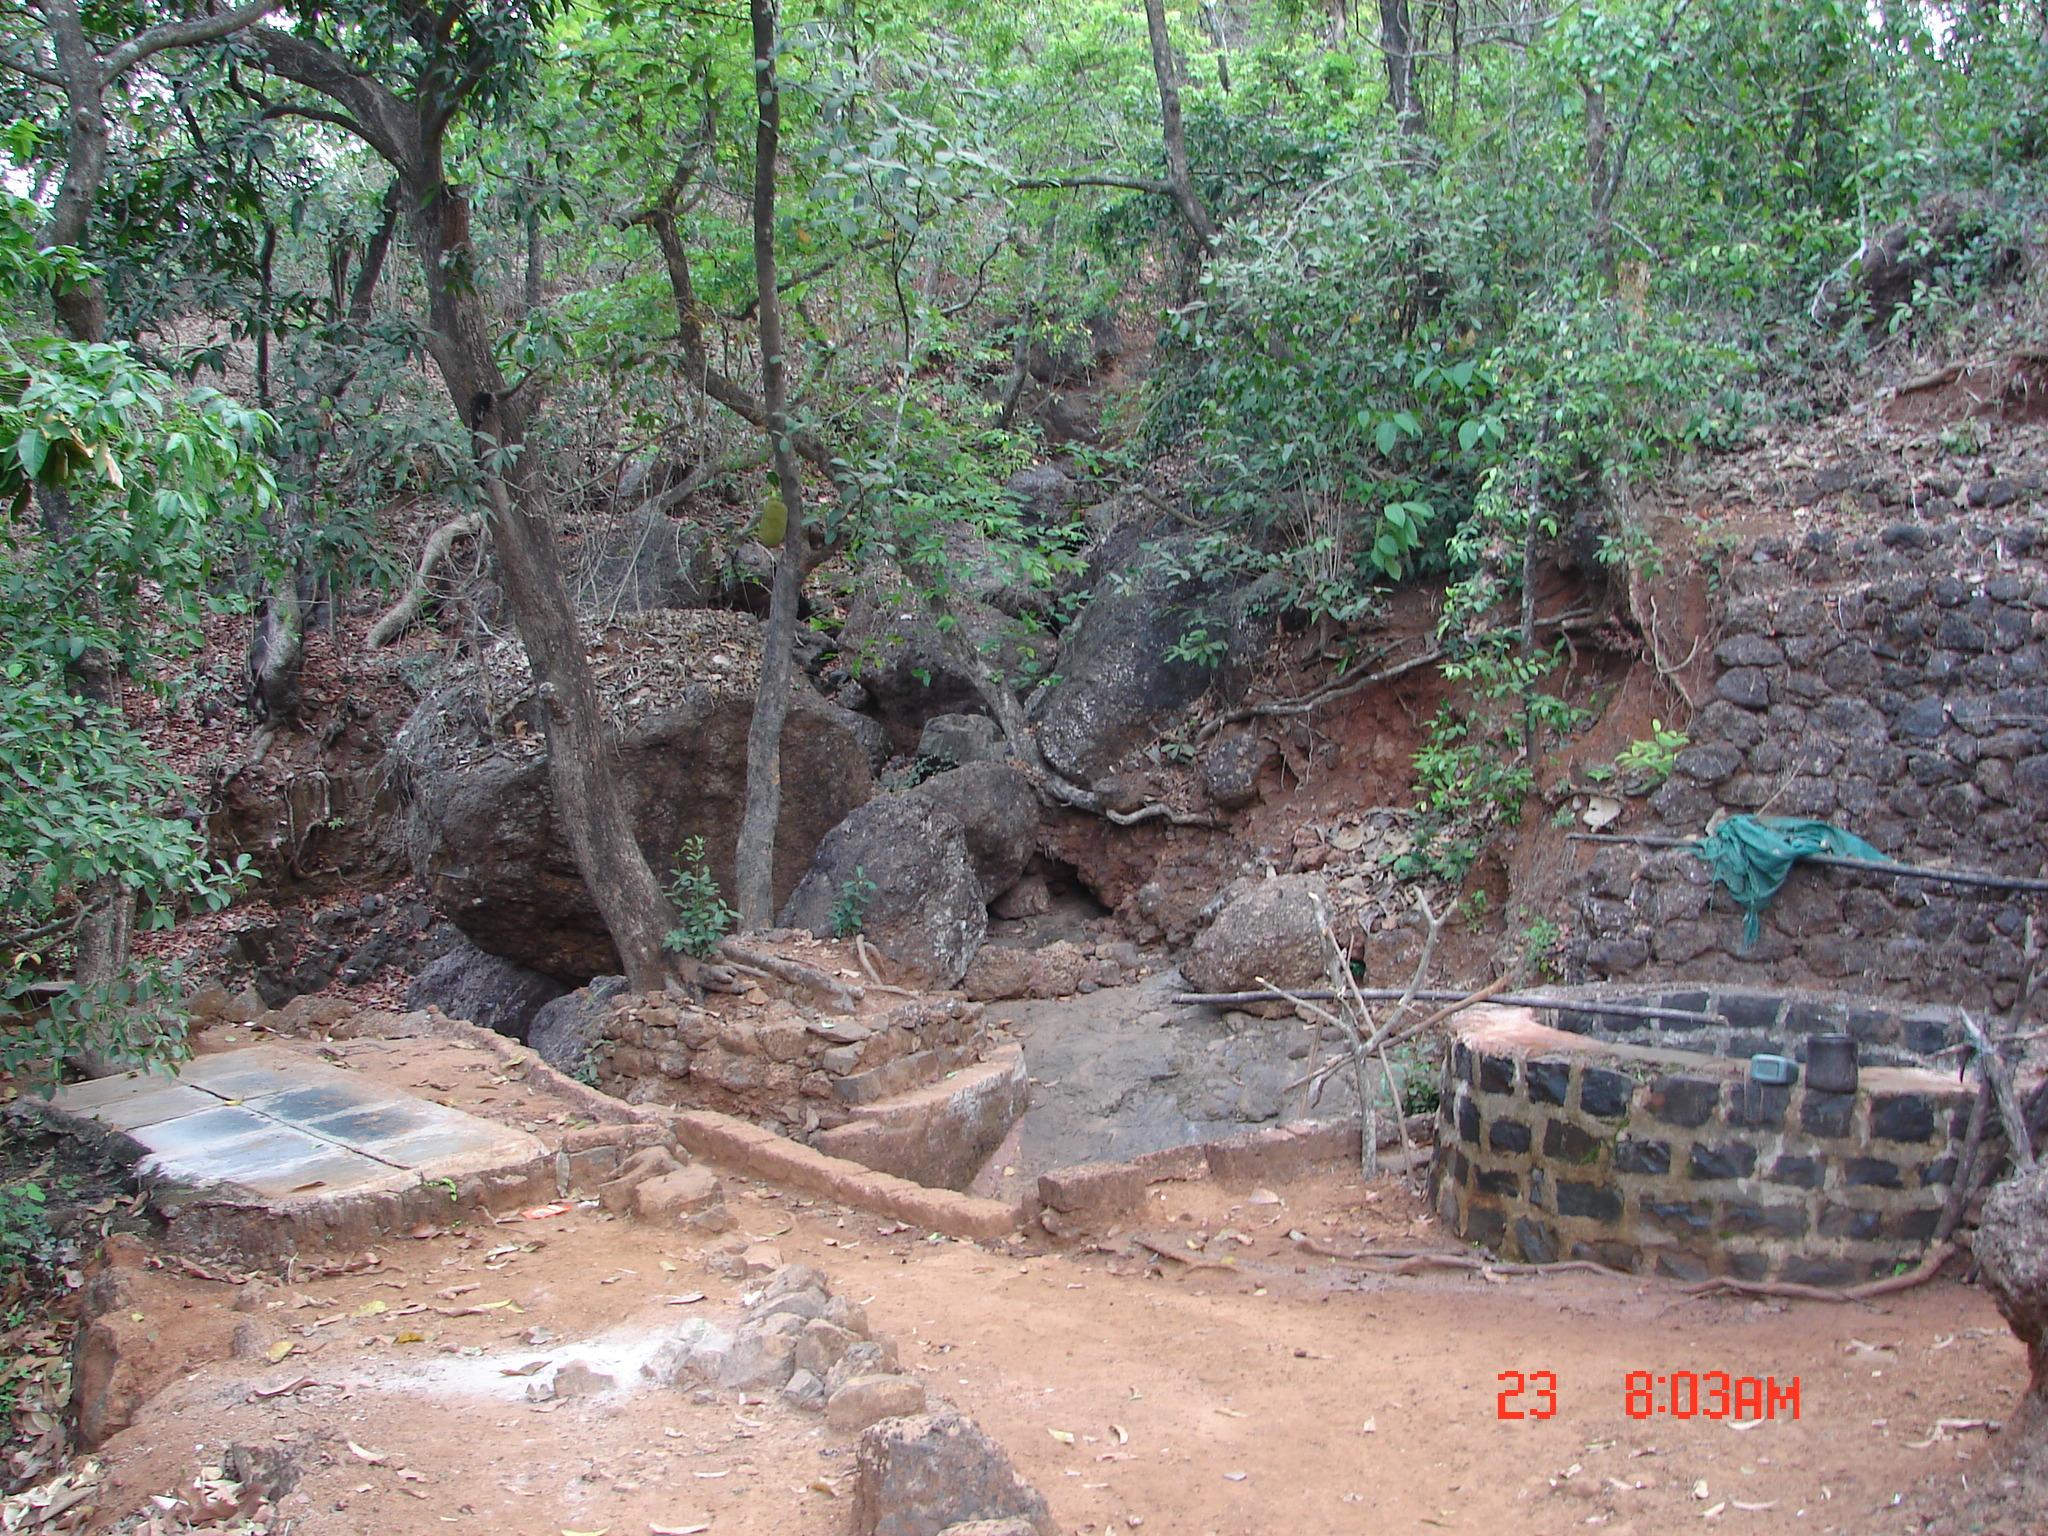 A springwater collection system at Kolhe Waadi in summer. The shallow well contains clean drinking water.